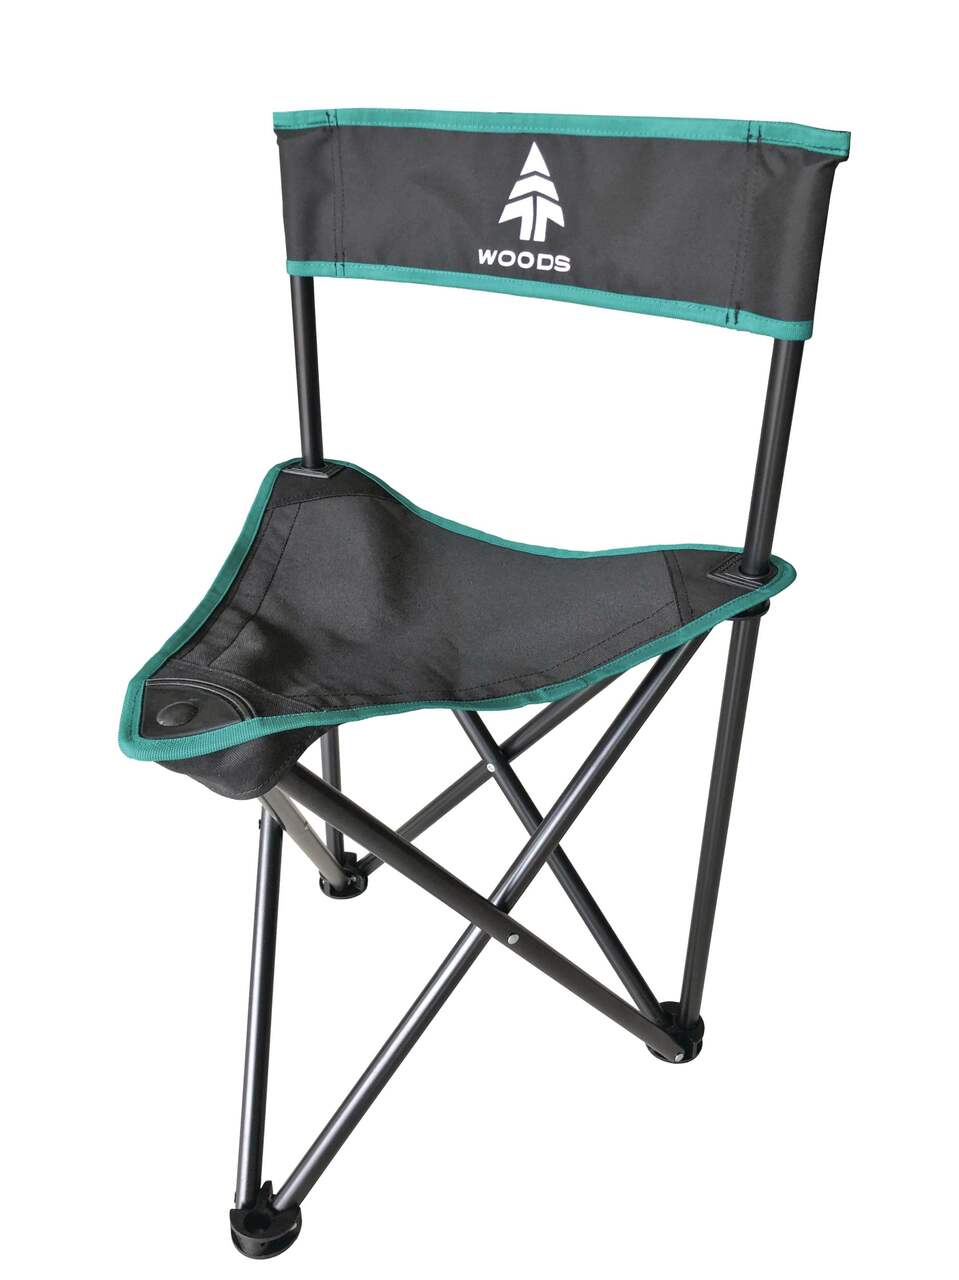 Camping Folding Chair Smart Fishing Chair with Cooler Bag Combine Set